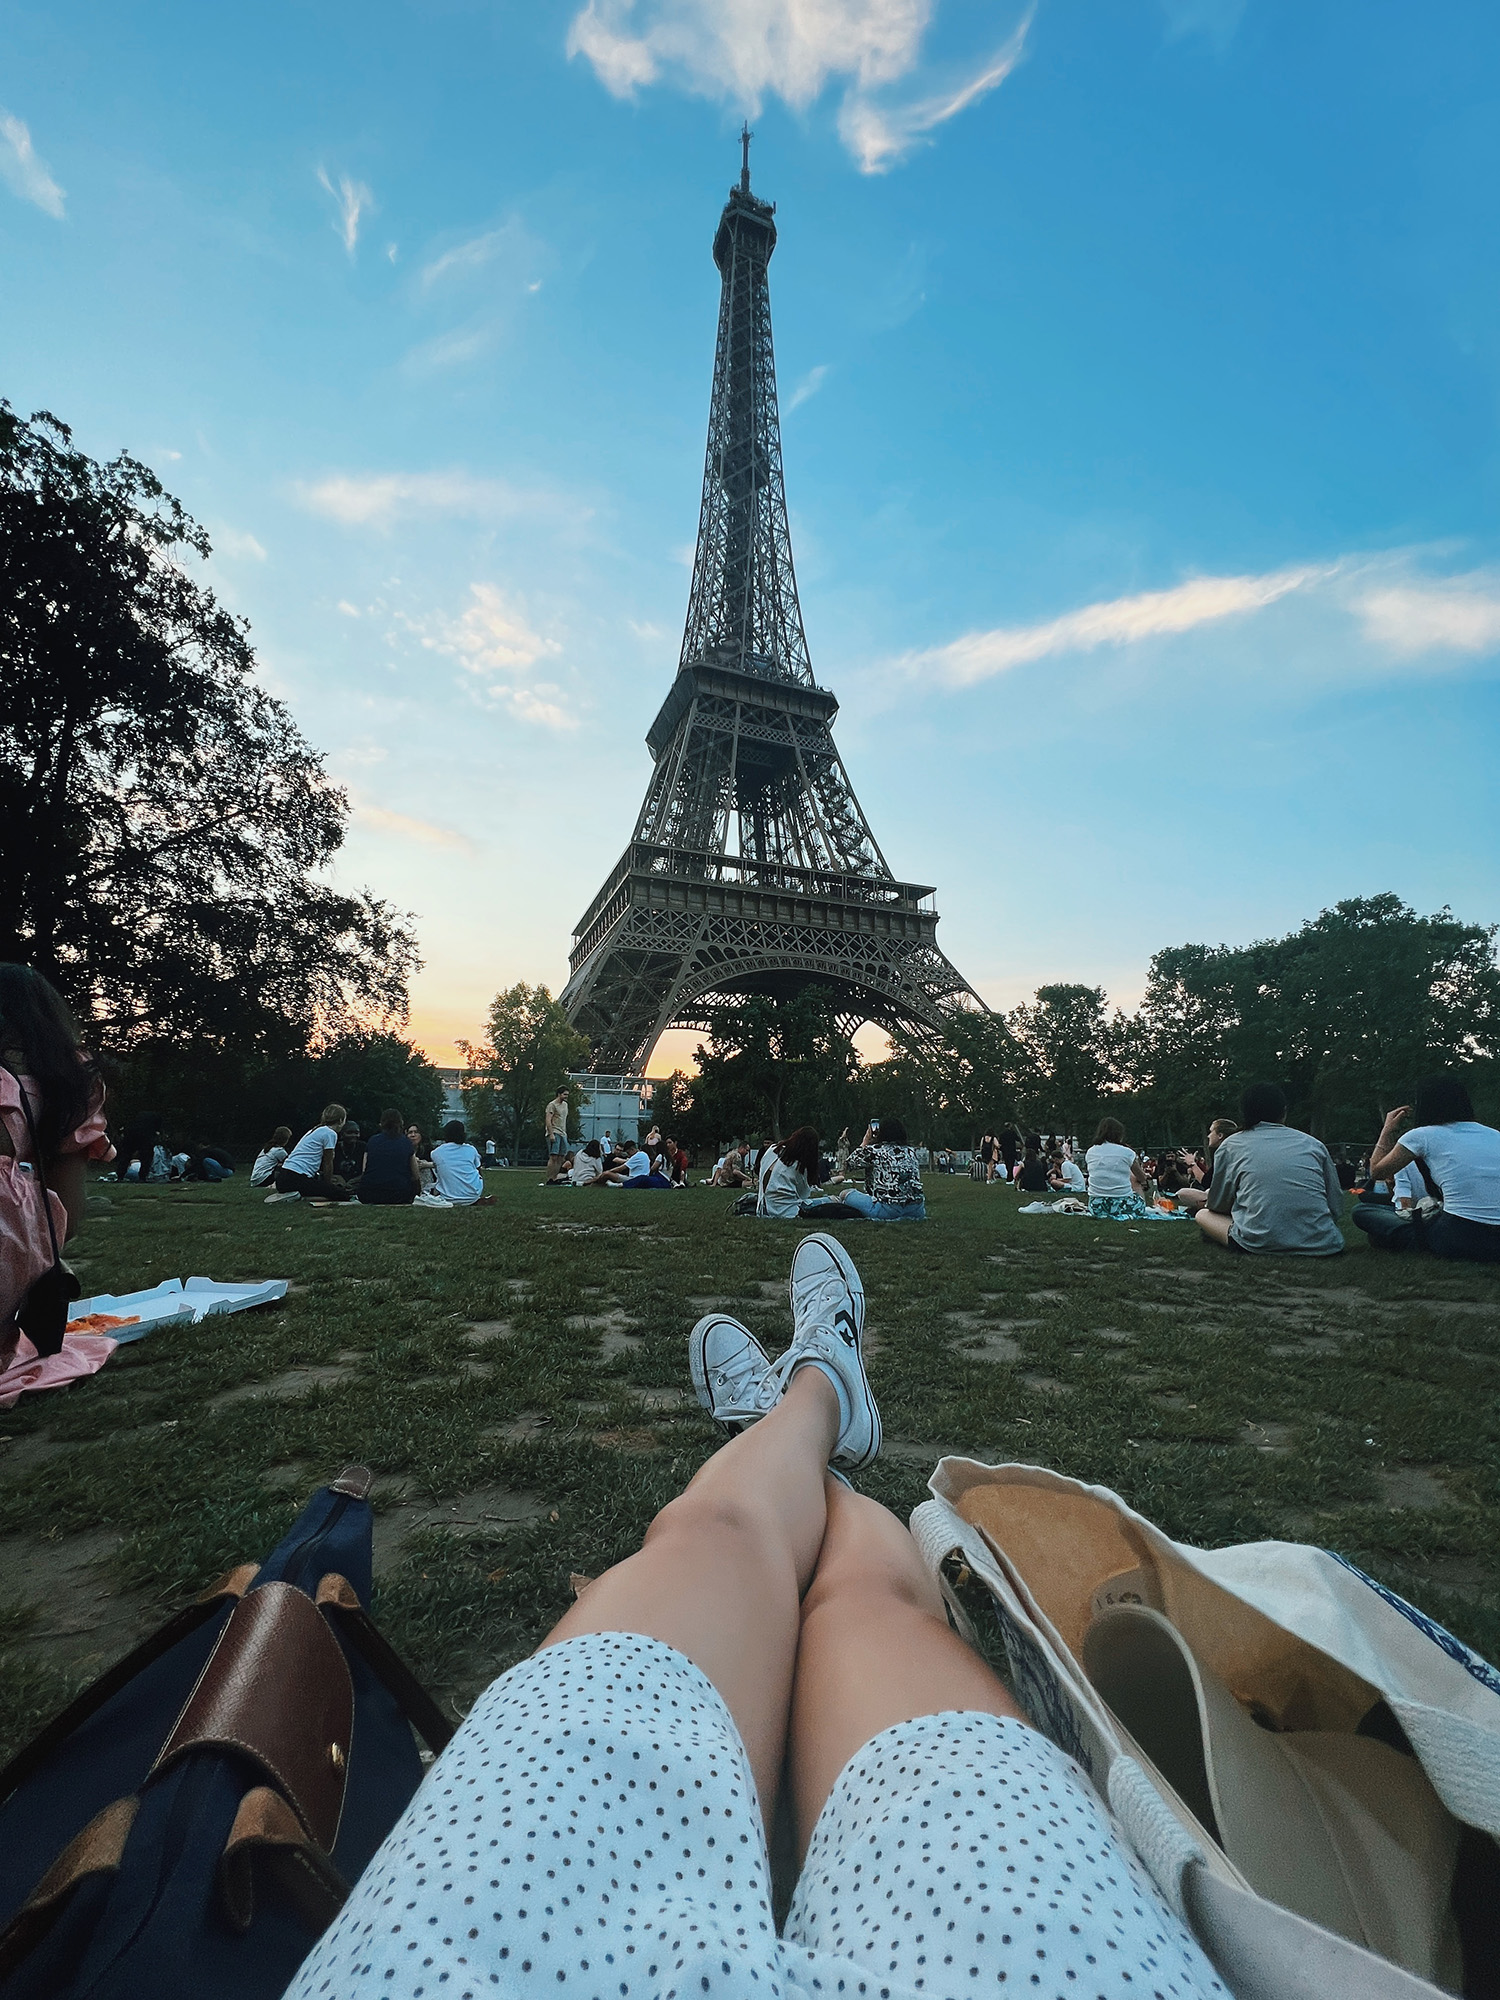 Sunset Picnic under the Eiffel Tower